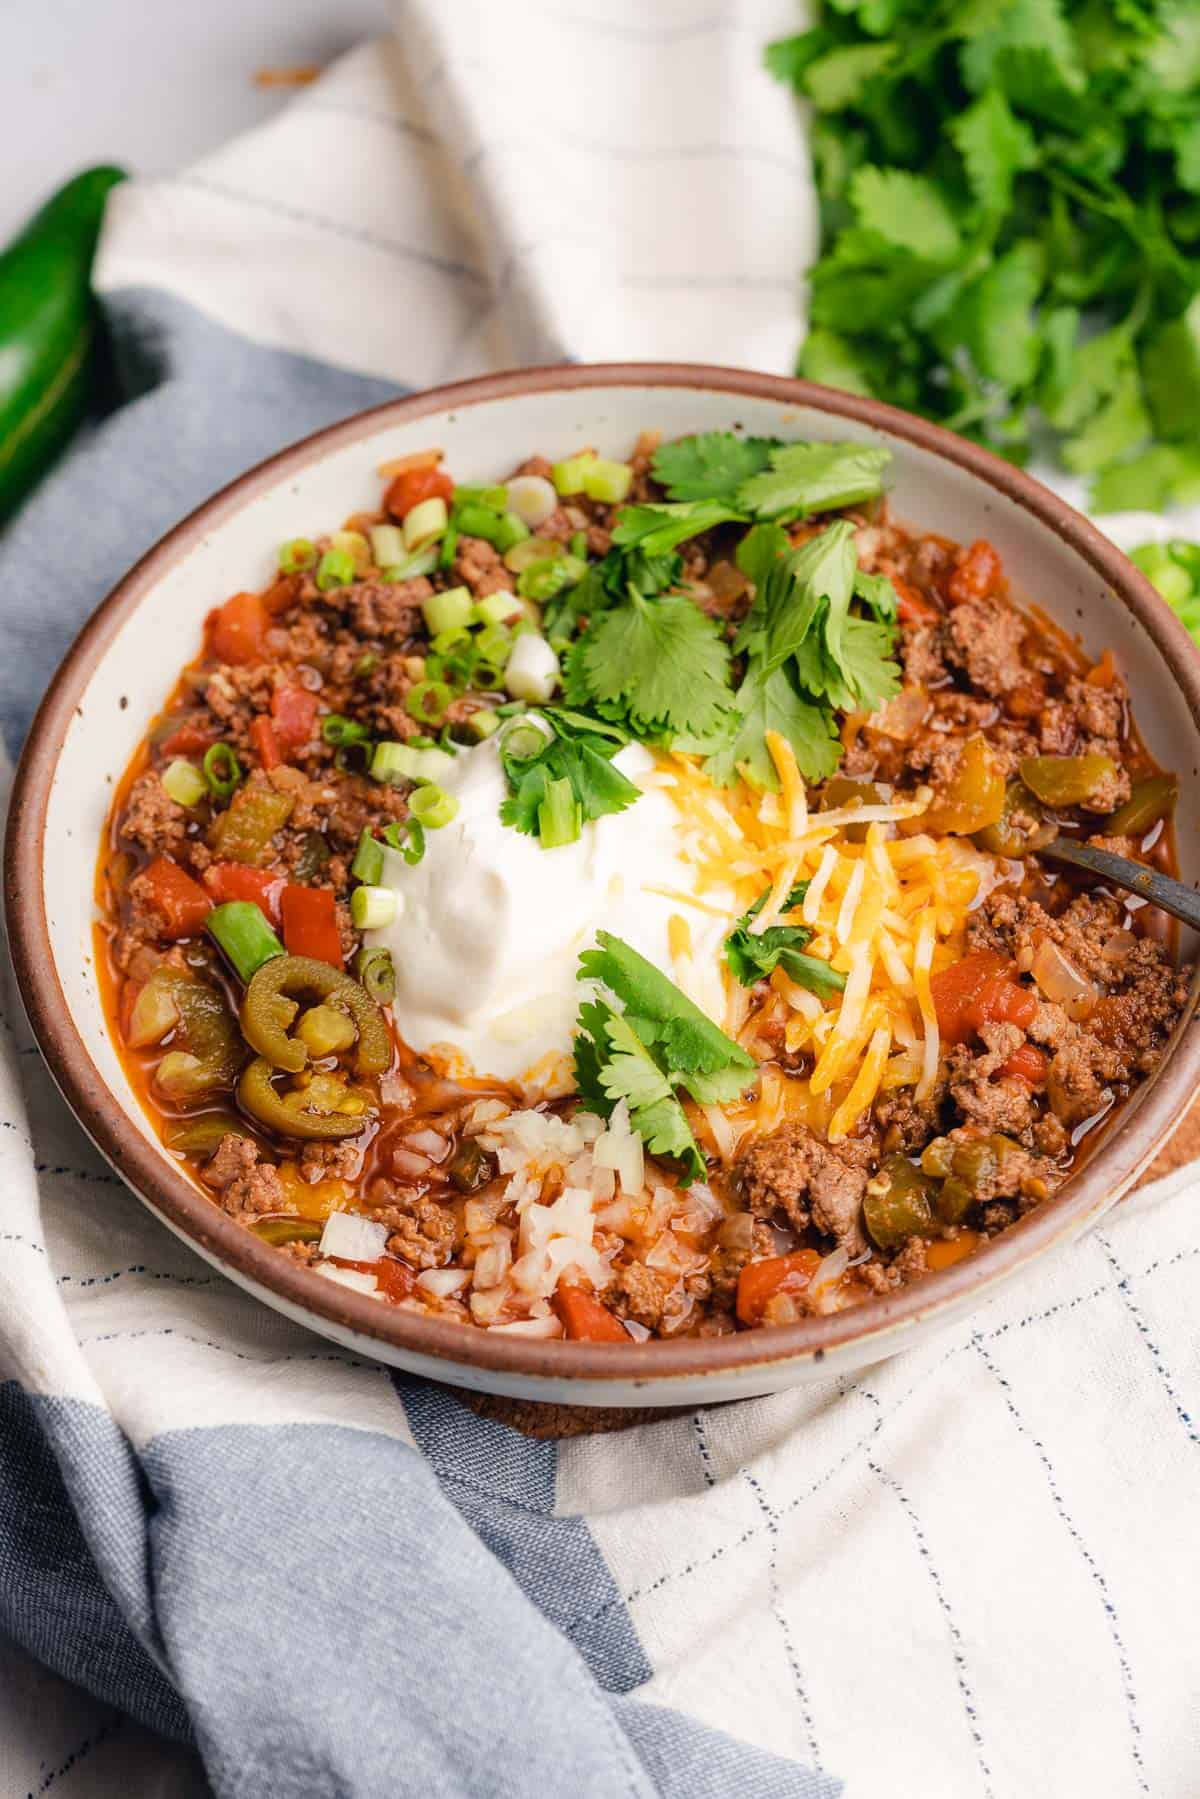 large bowl of chili with cheese, sour cream, green onions, cilantro and pickled jalapeños